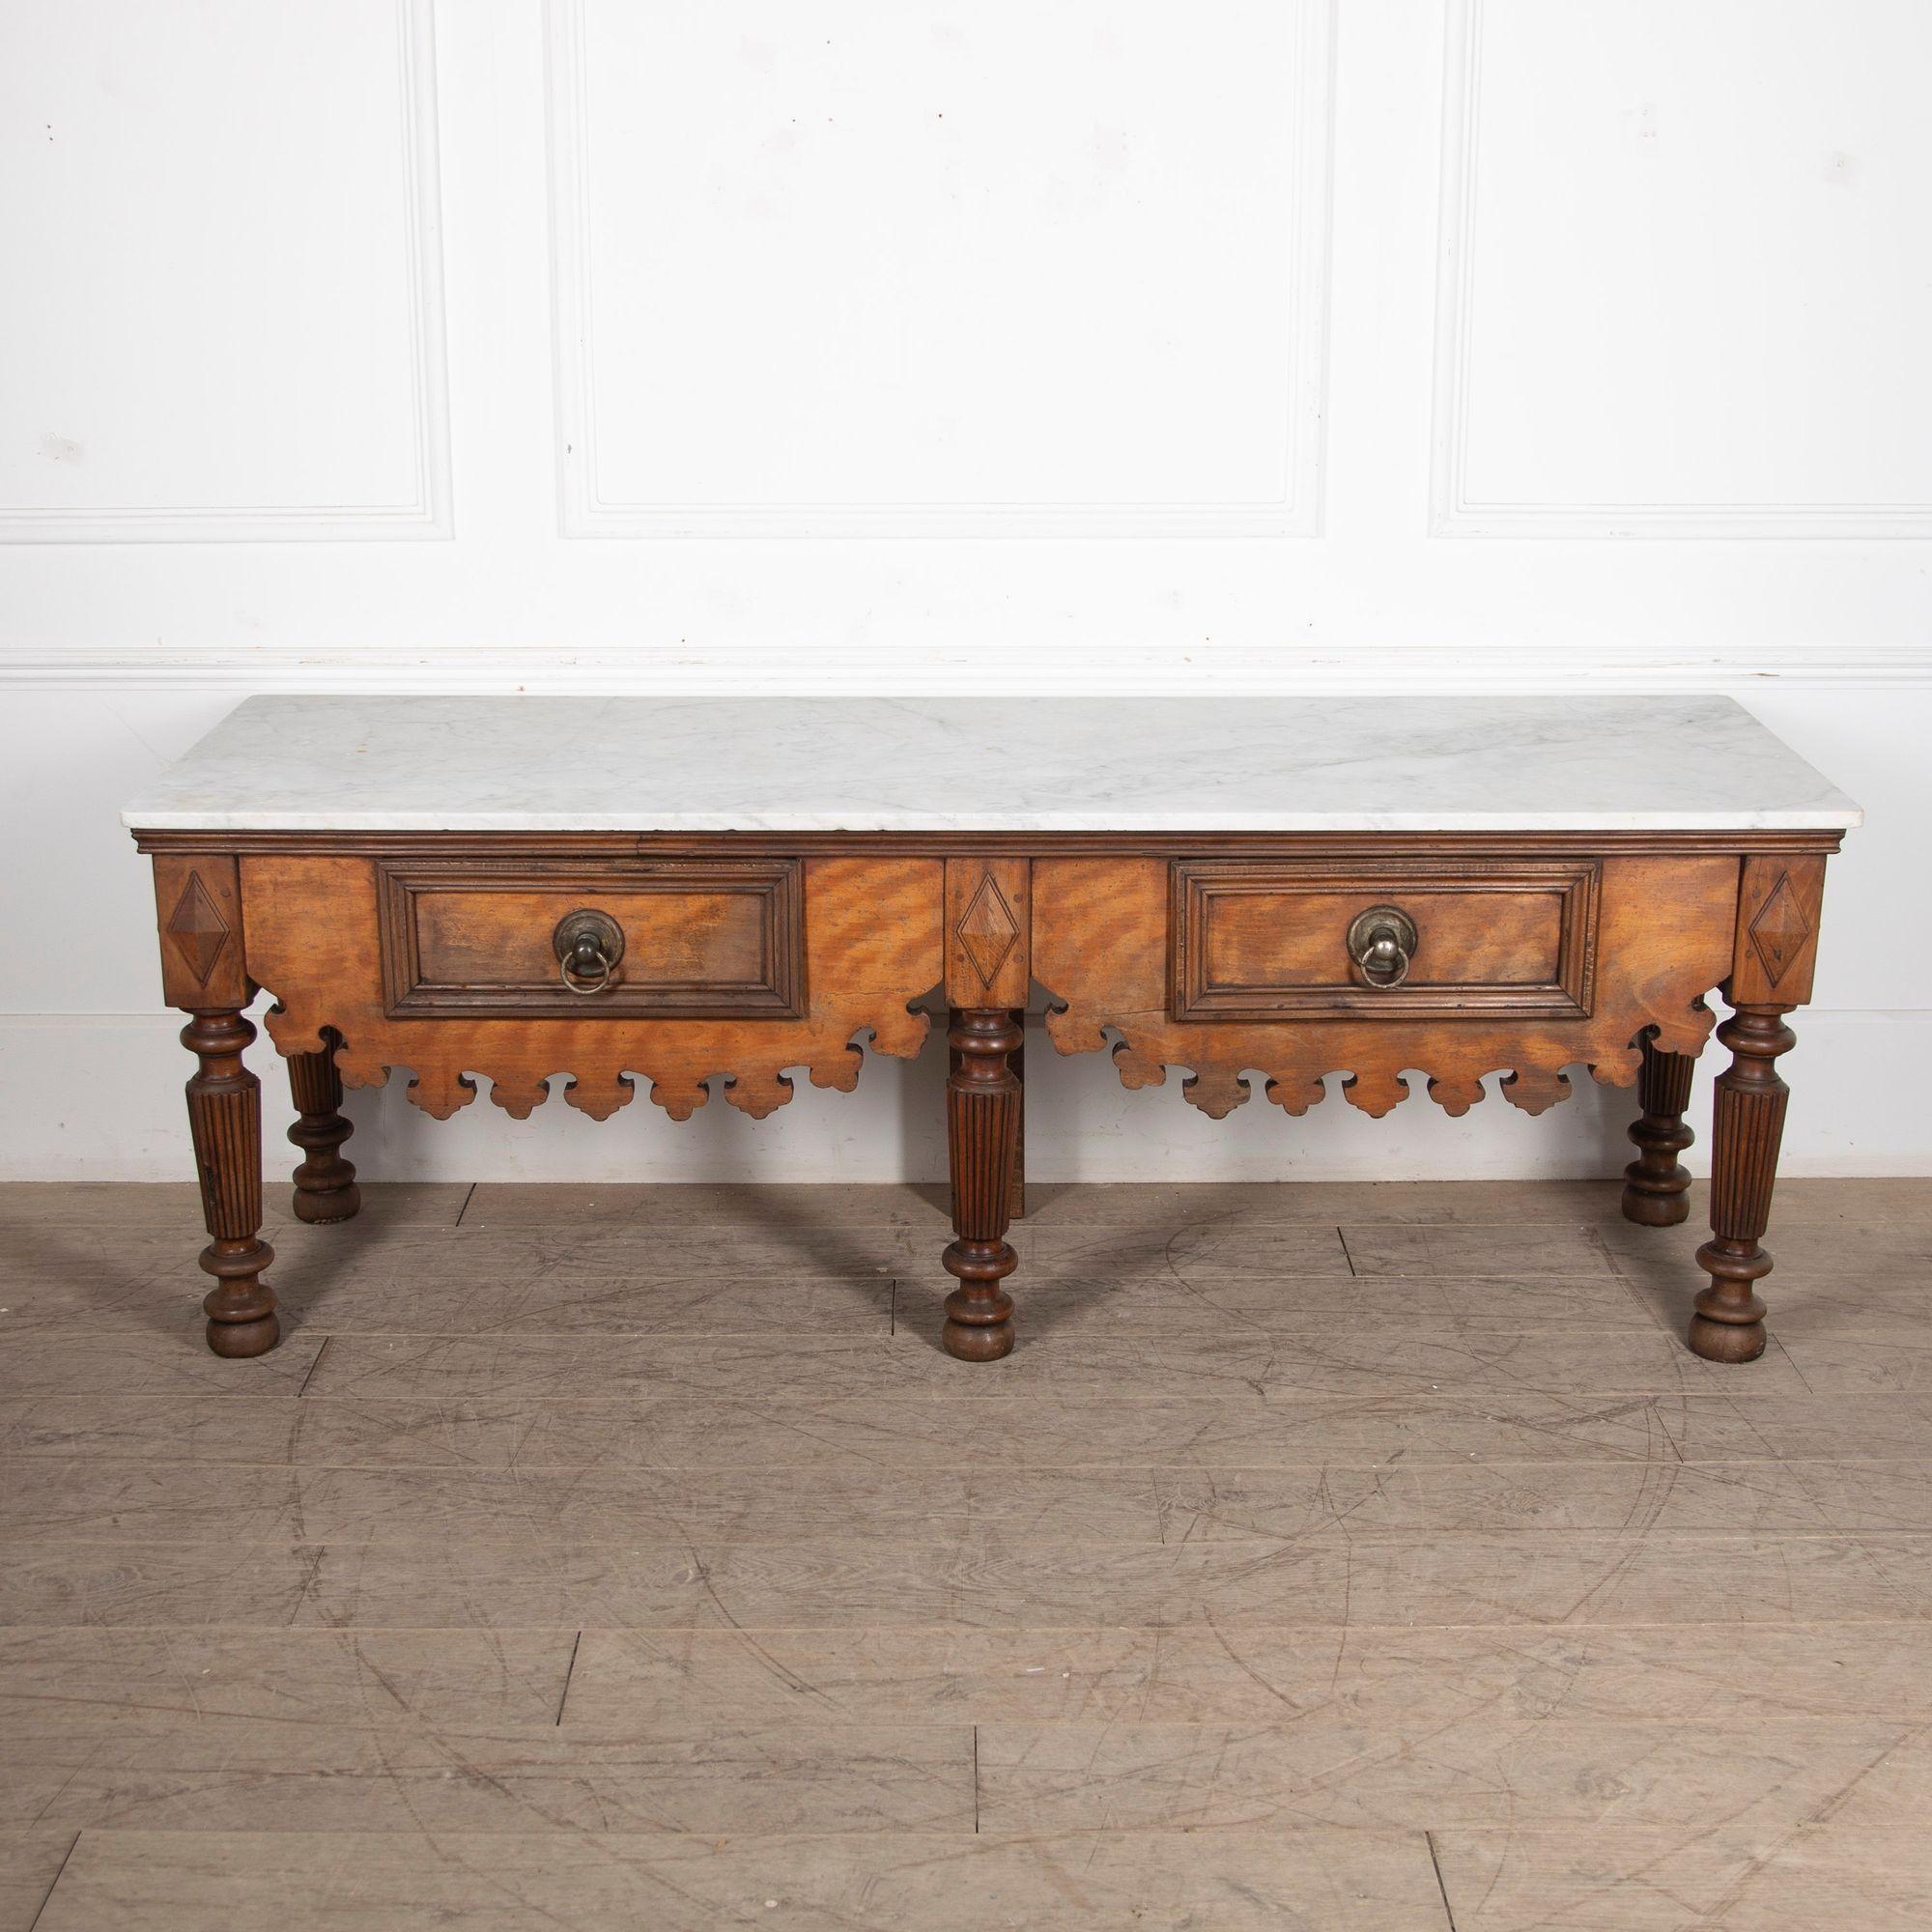 Fabulous late 19th Century marble top butcher's table.
Constructed from beech with two large drawers to the front; both are in full working order. 
With historic signs of wear, adding to its charm. Would make for a fabulous kitchen or serving